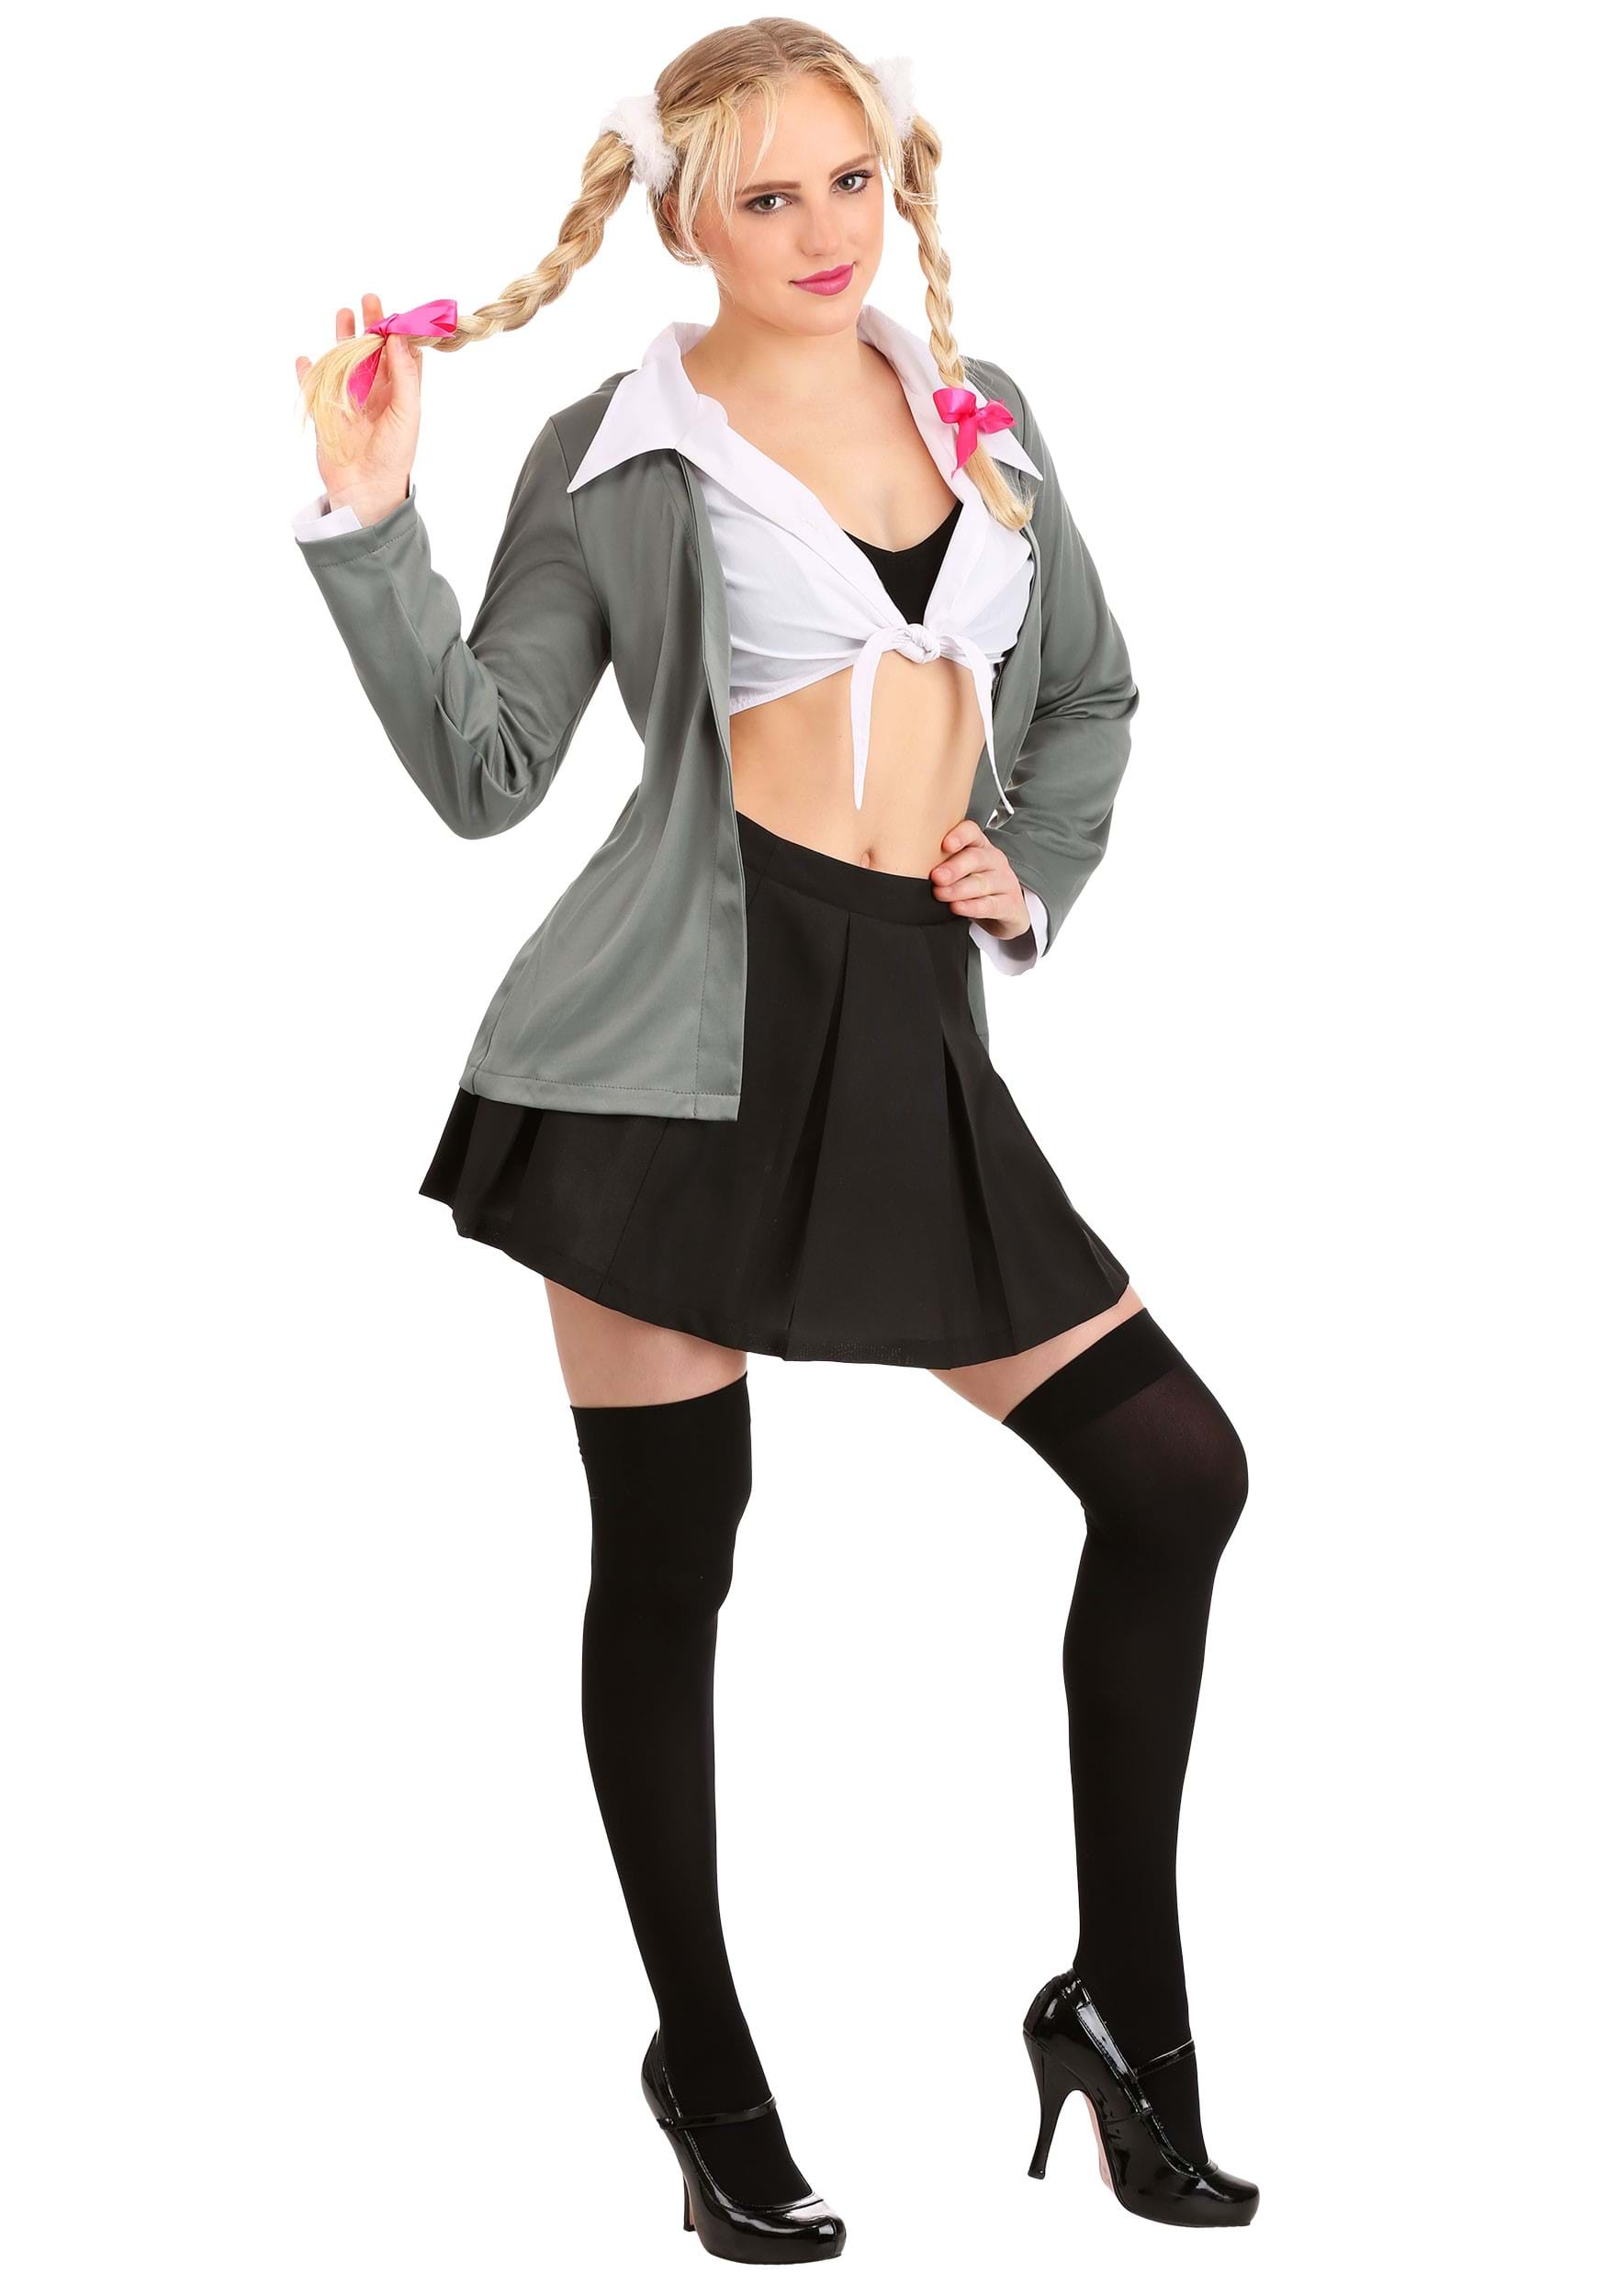 One More Time Pop Singer Costume For Women Exclusive